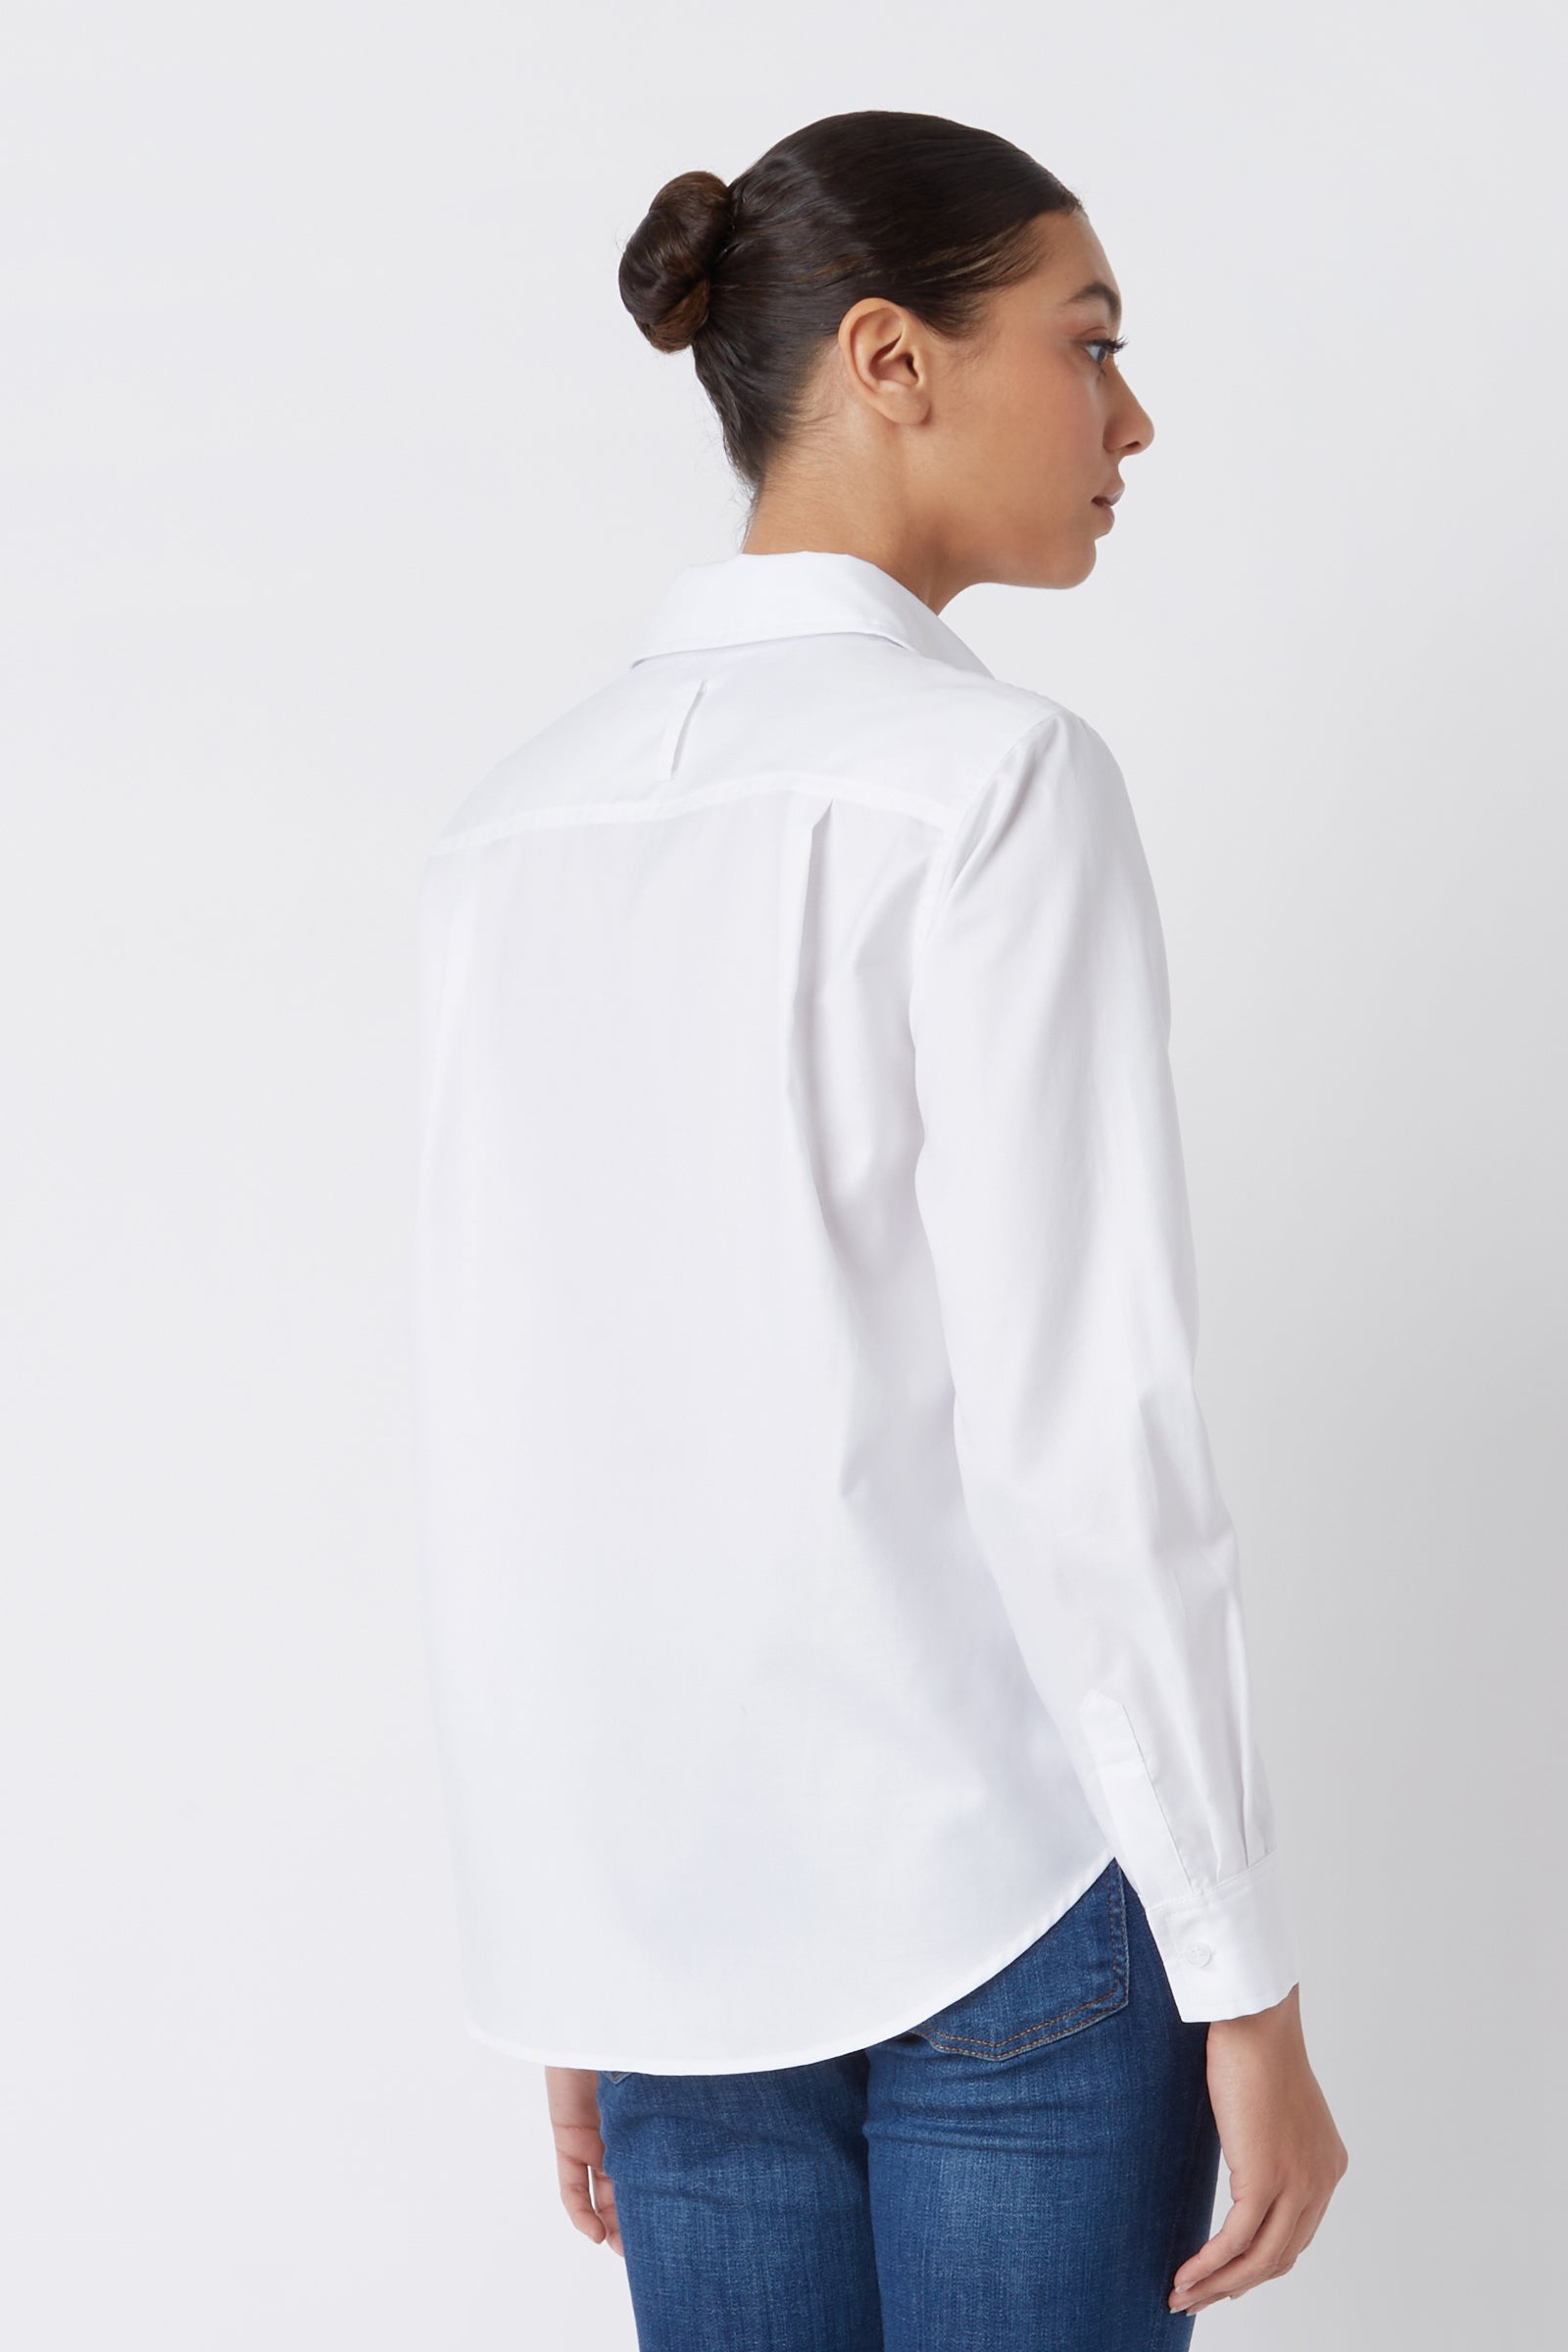 Kal Rieman Classic Tailored Shirt in White Stretch on Model Full Front View